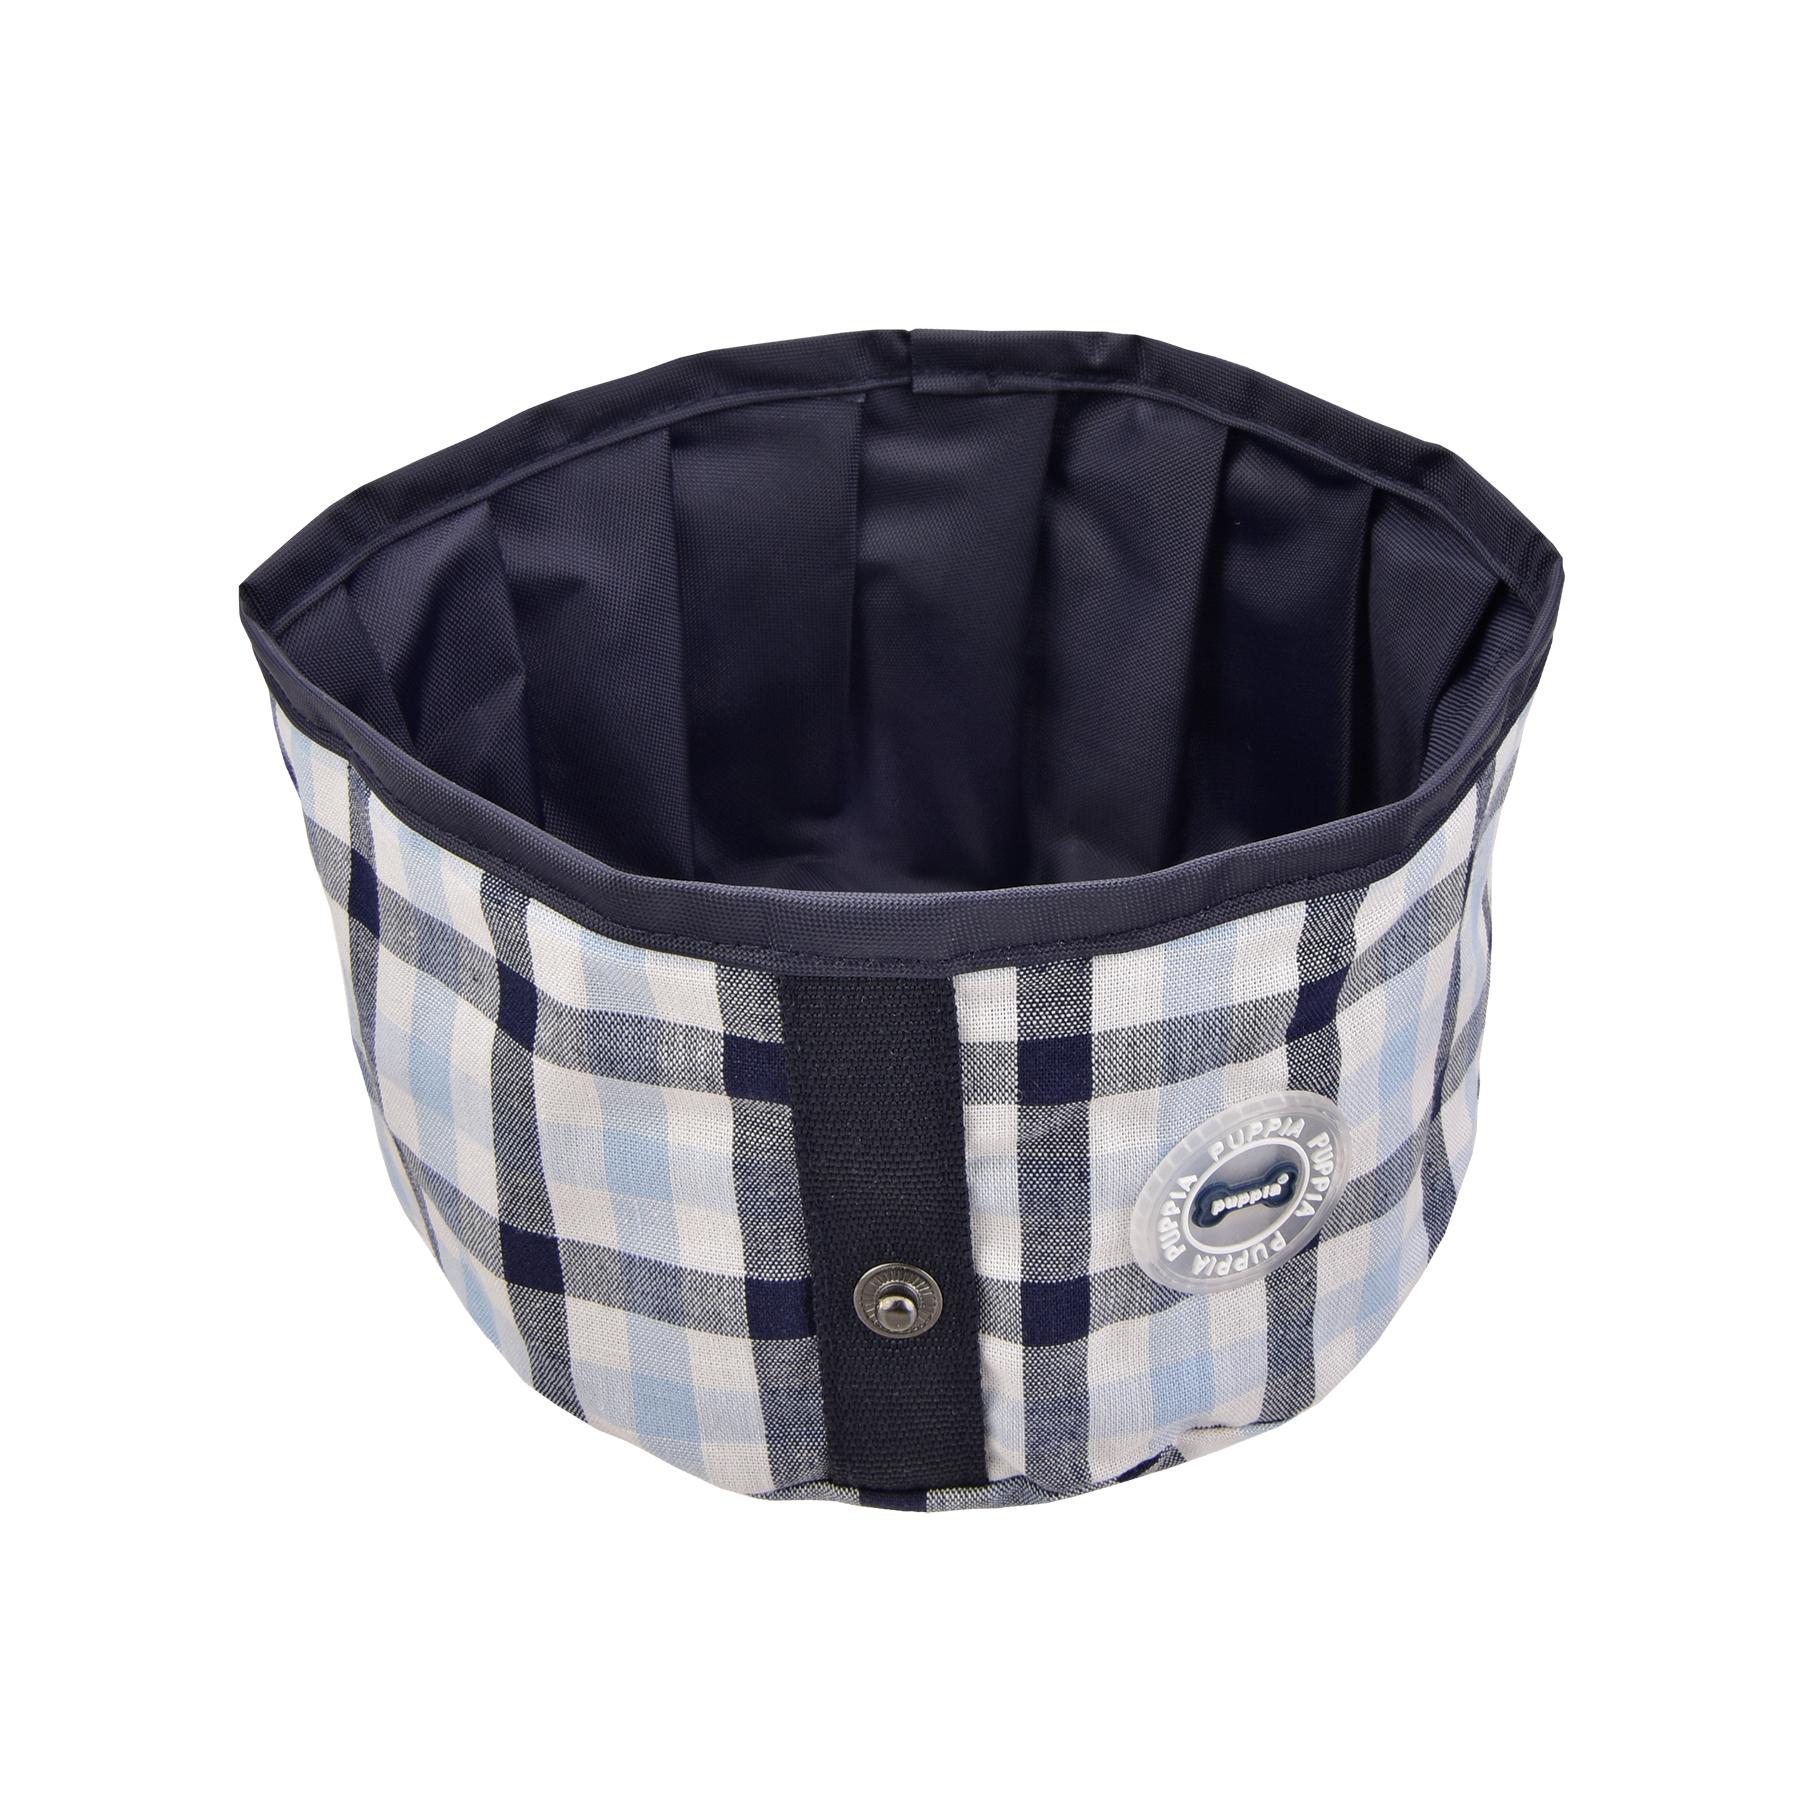 Neil Round Portable Dog Bowl by Puppia Life - Navy